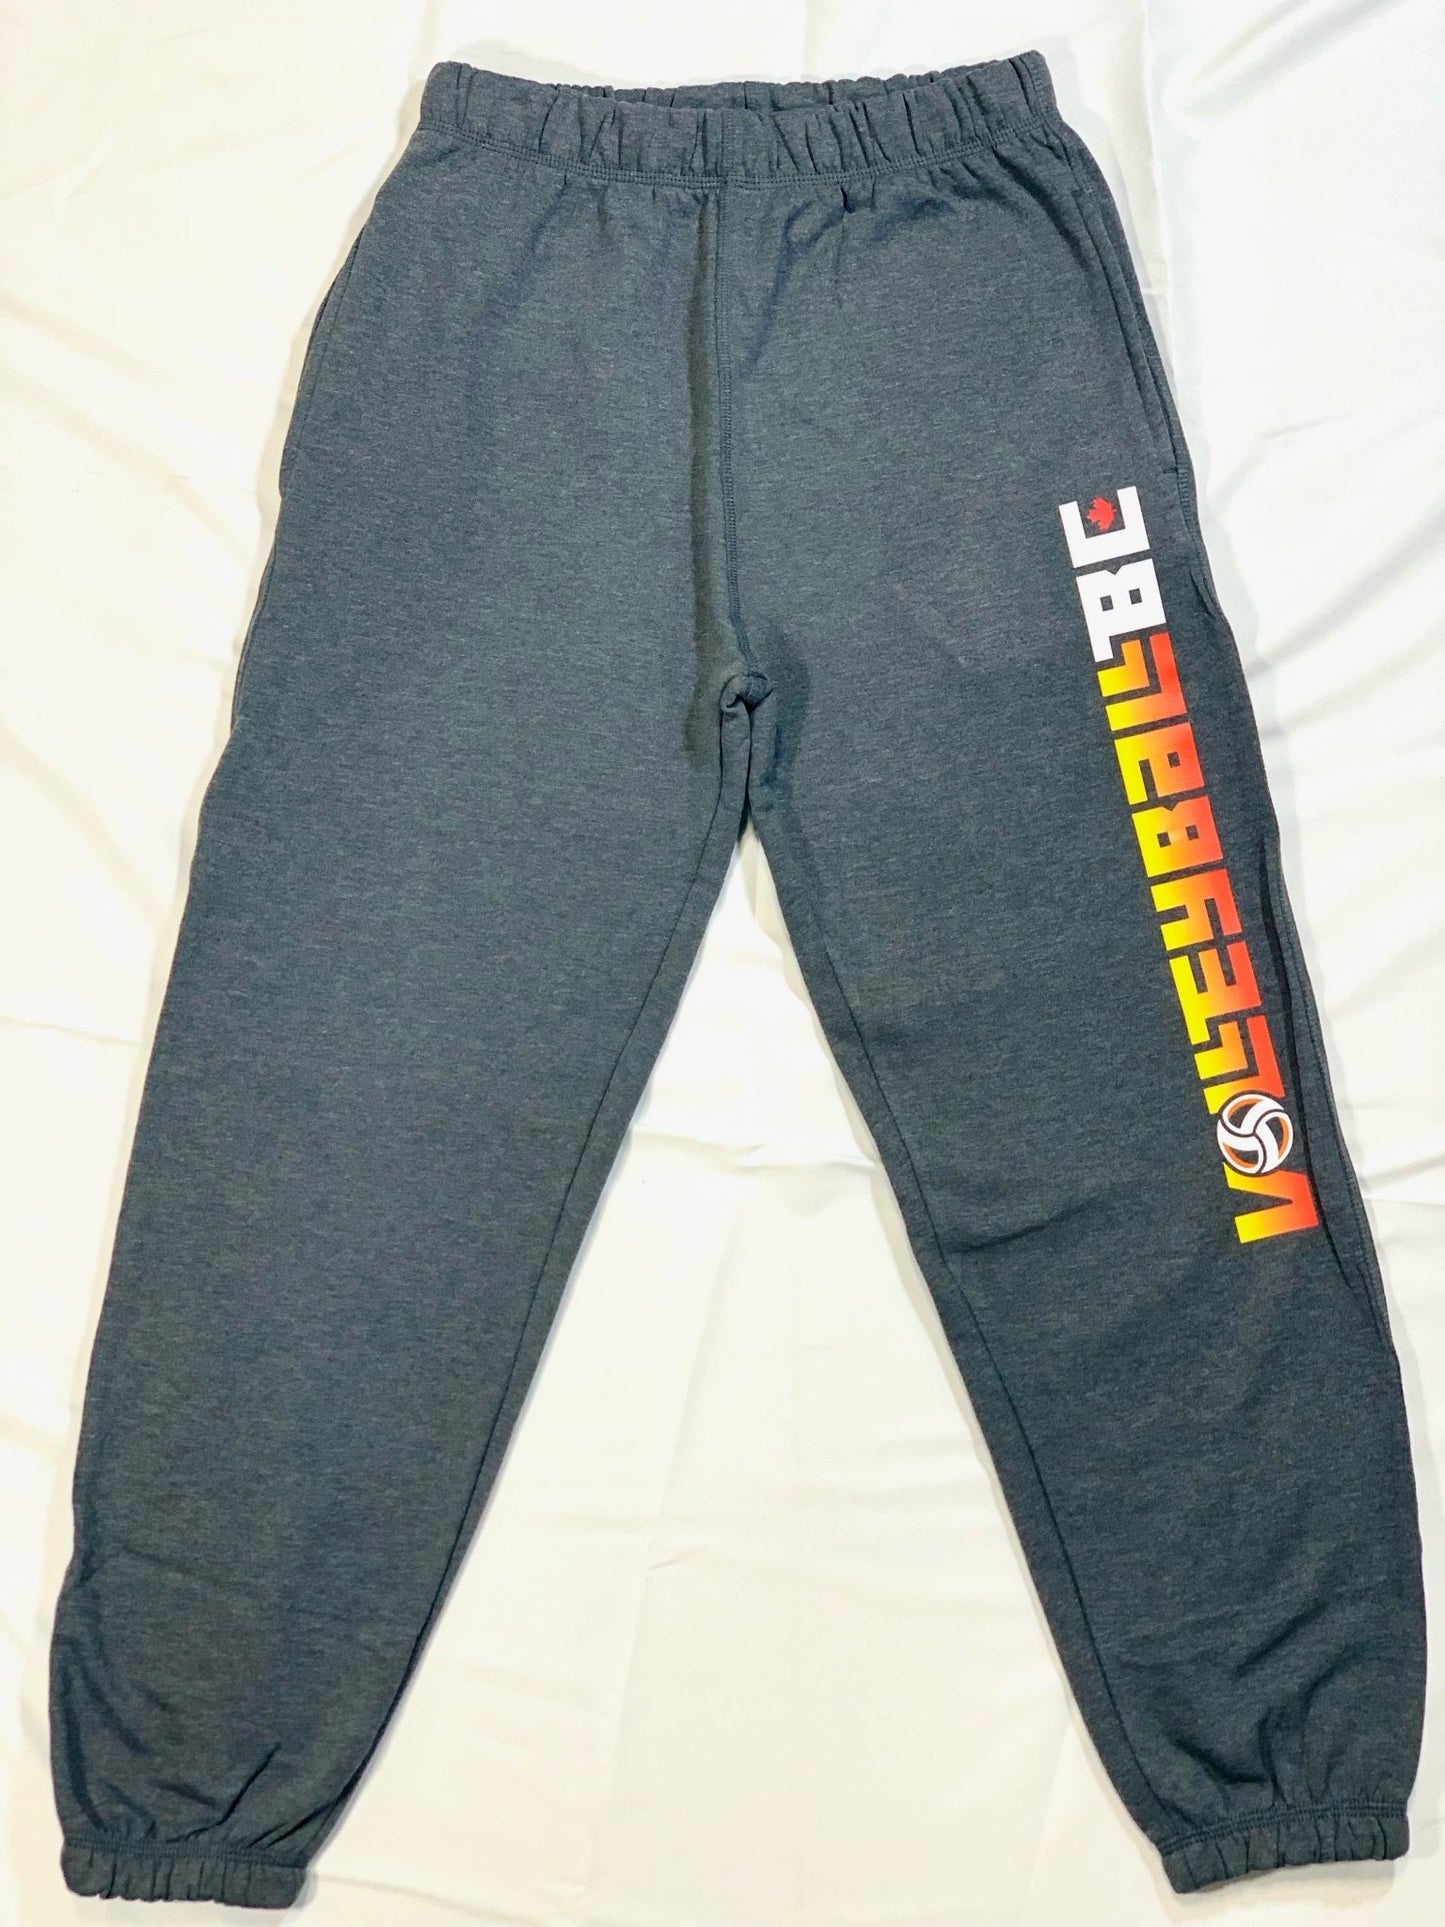 Volleyball BC Stacked Sunset Sweatpants - Oddball Workshop